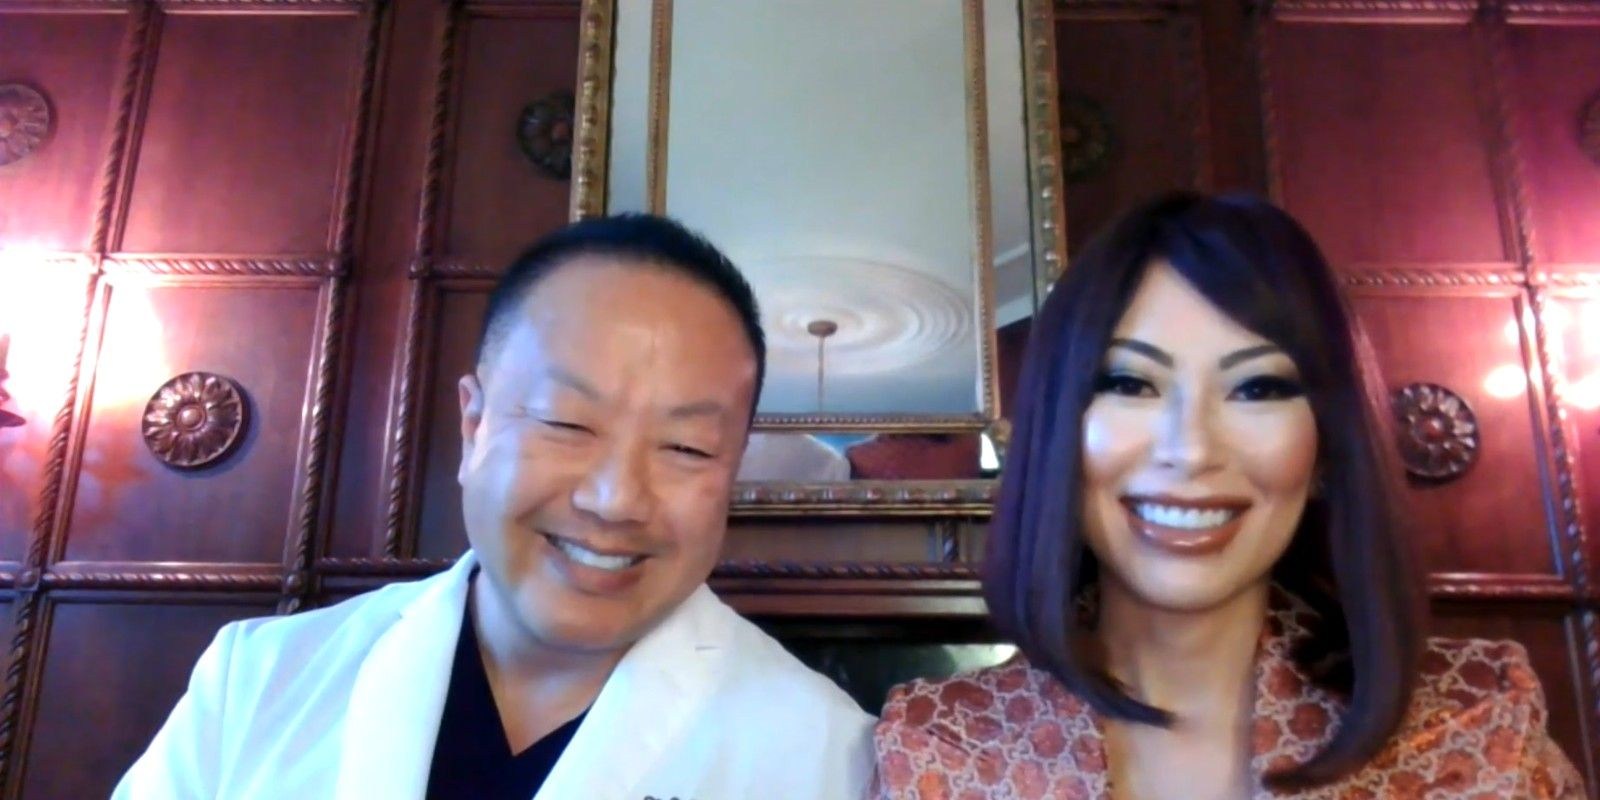 Bling Empire: Dr. Gabriel Chui's Net Worth, Career, Chinese Ancestry & More